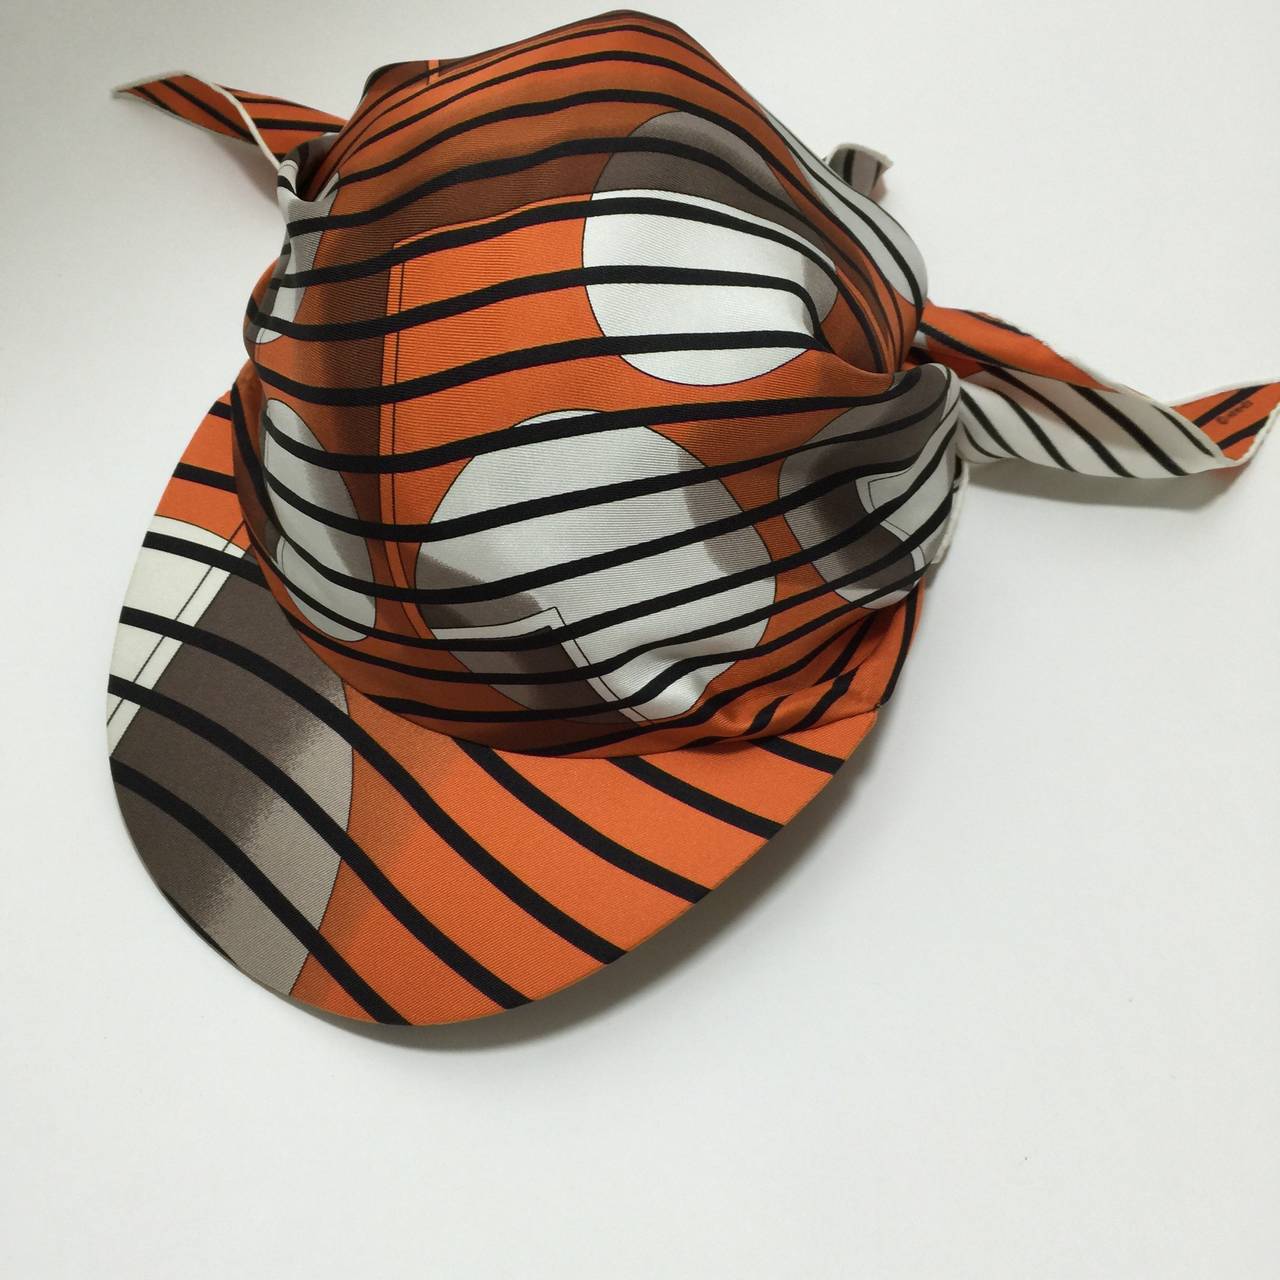 Featuring lightweight orange, black and white geometric print on silk,  a firm cap brim and a soft silk scarf top with self tie back closure. I also love that you can tie the scarf to the front under the chin.

Measurements:
Brim : W- 8.3'' H-